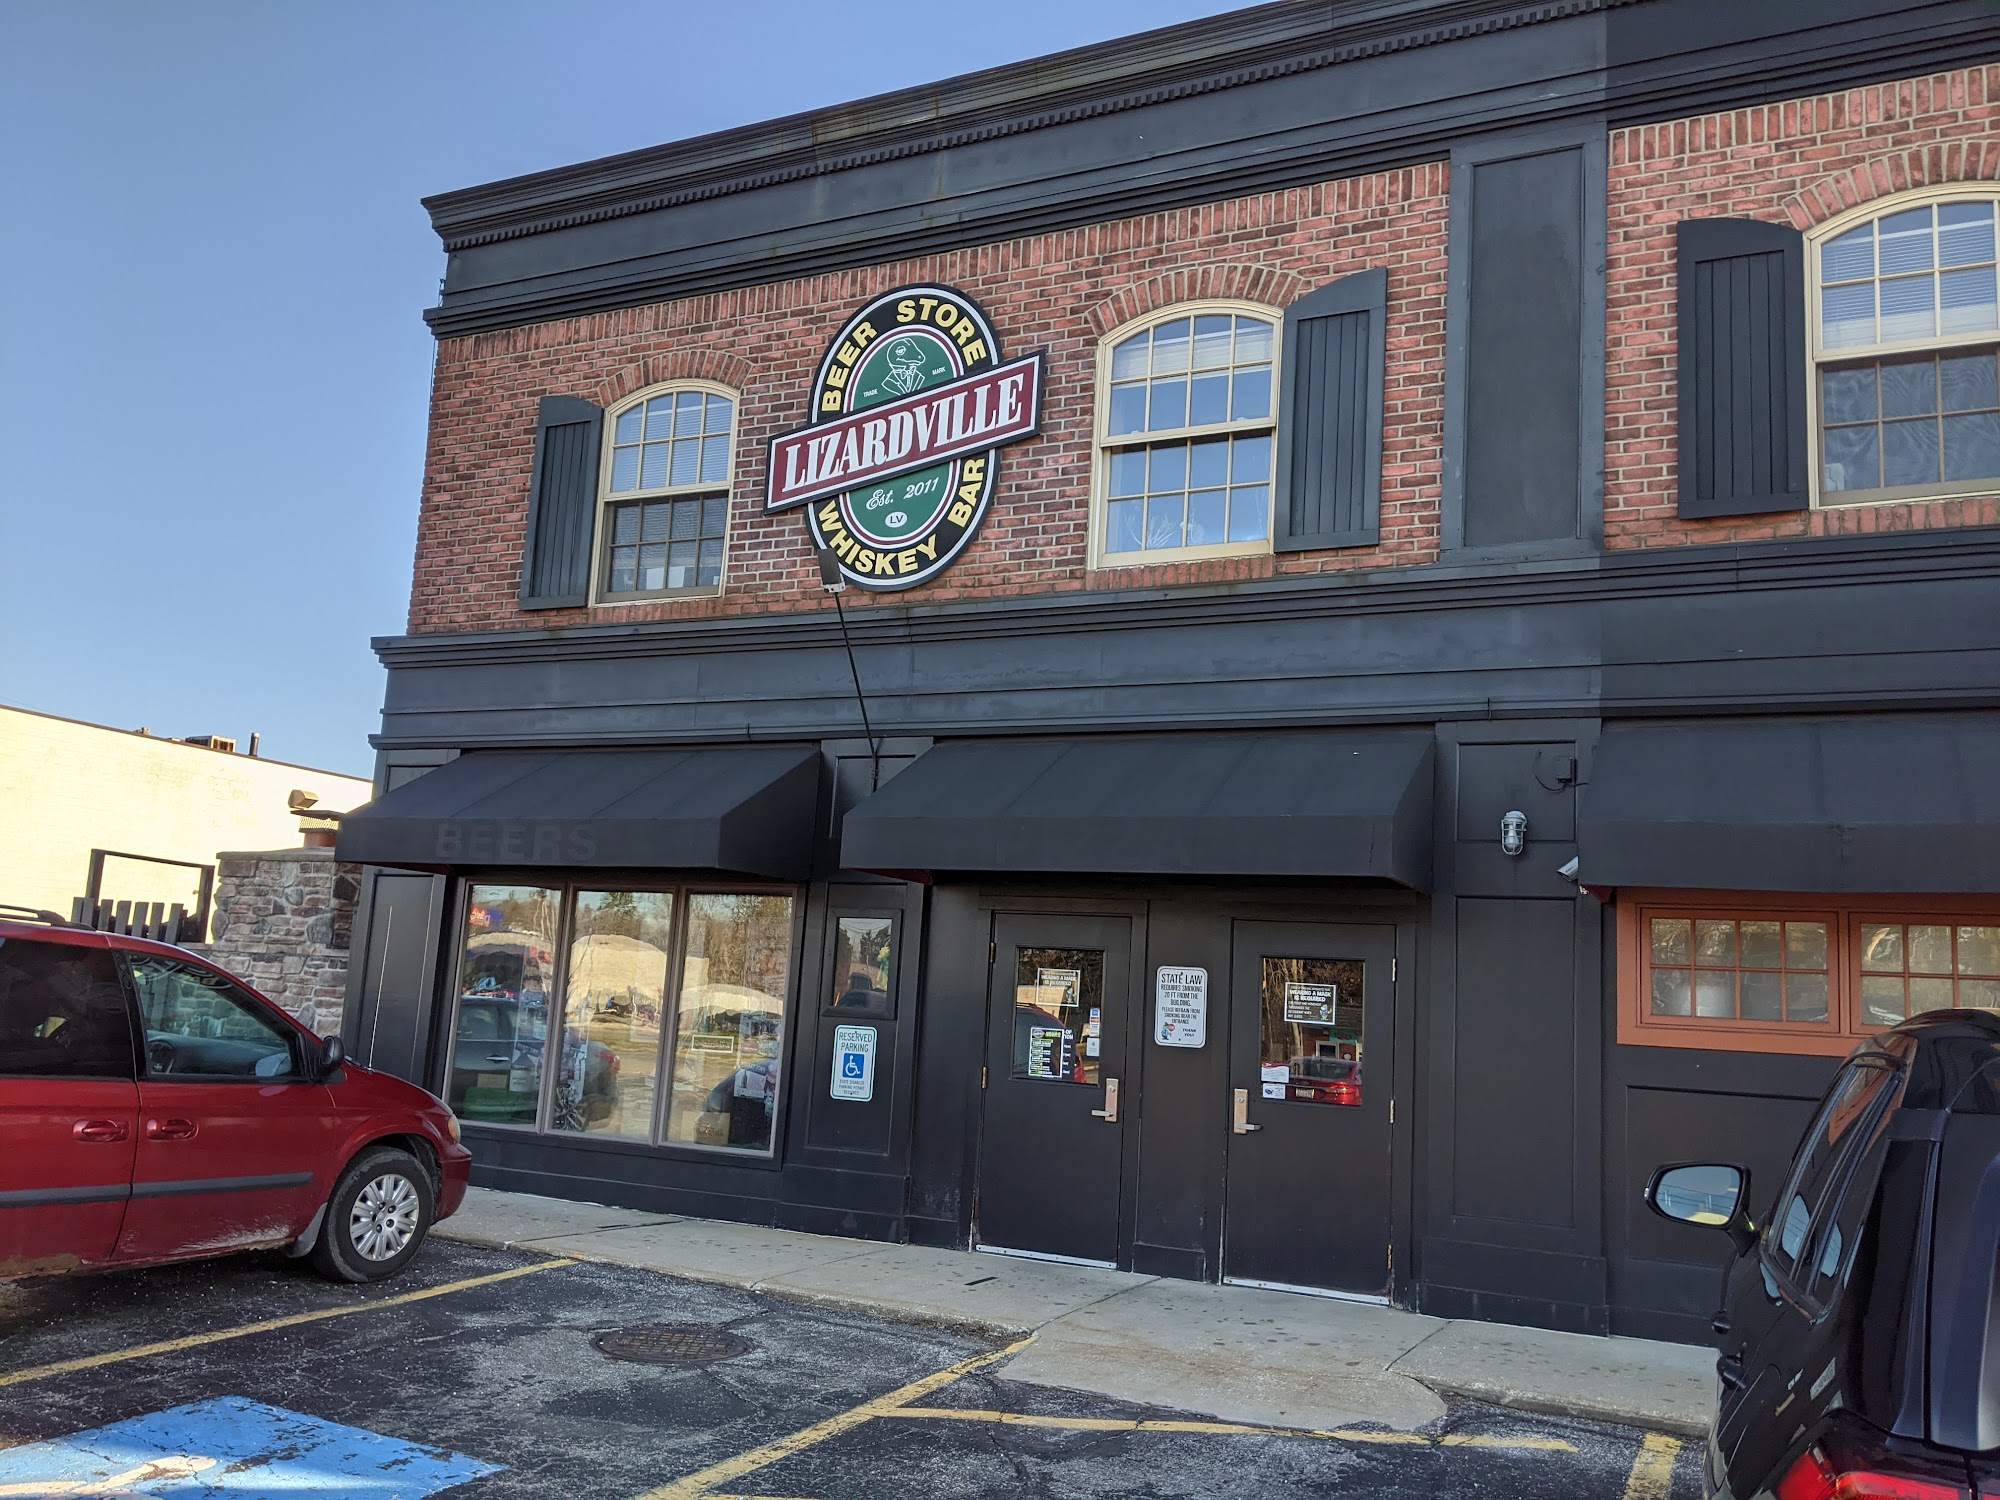 Lizardville Beer Store and Whiskey Bar